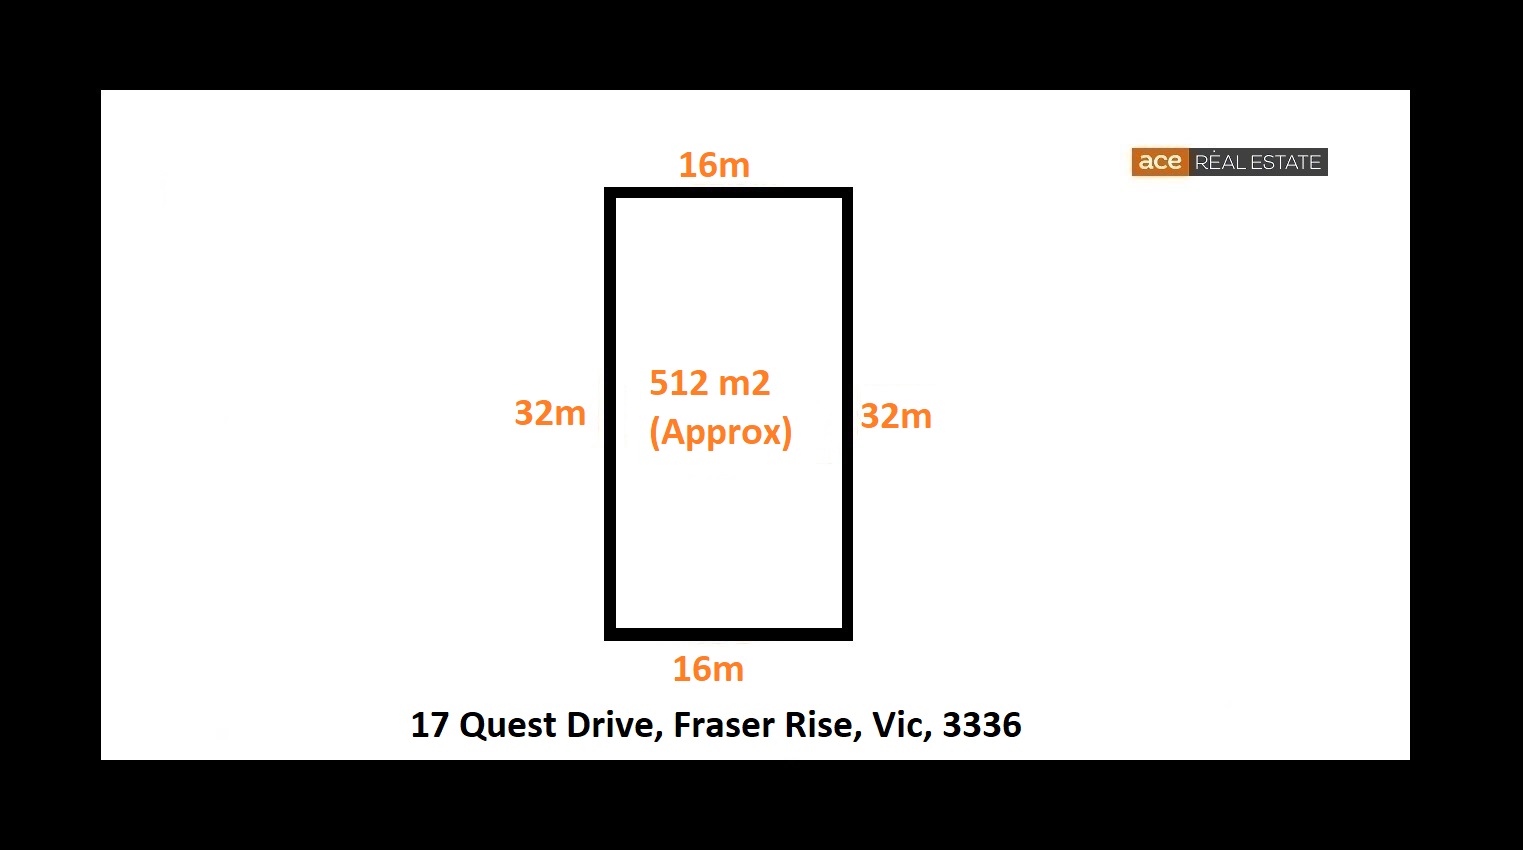 17 Quest Drive FRASER RISE VIC 3336